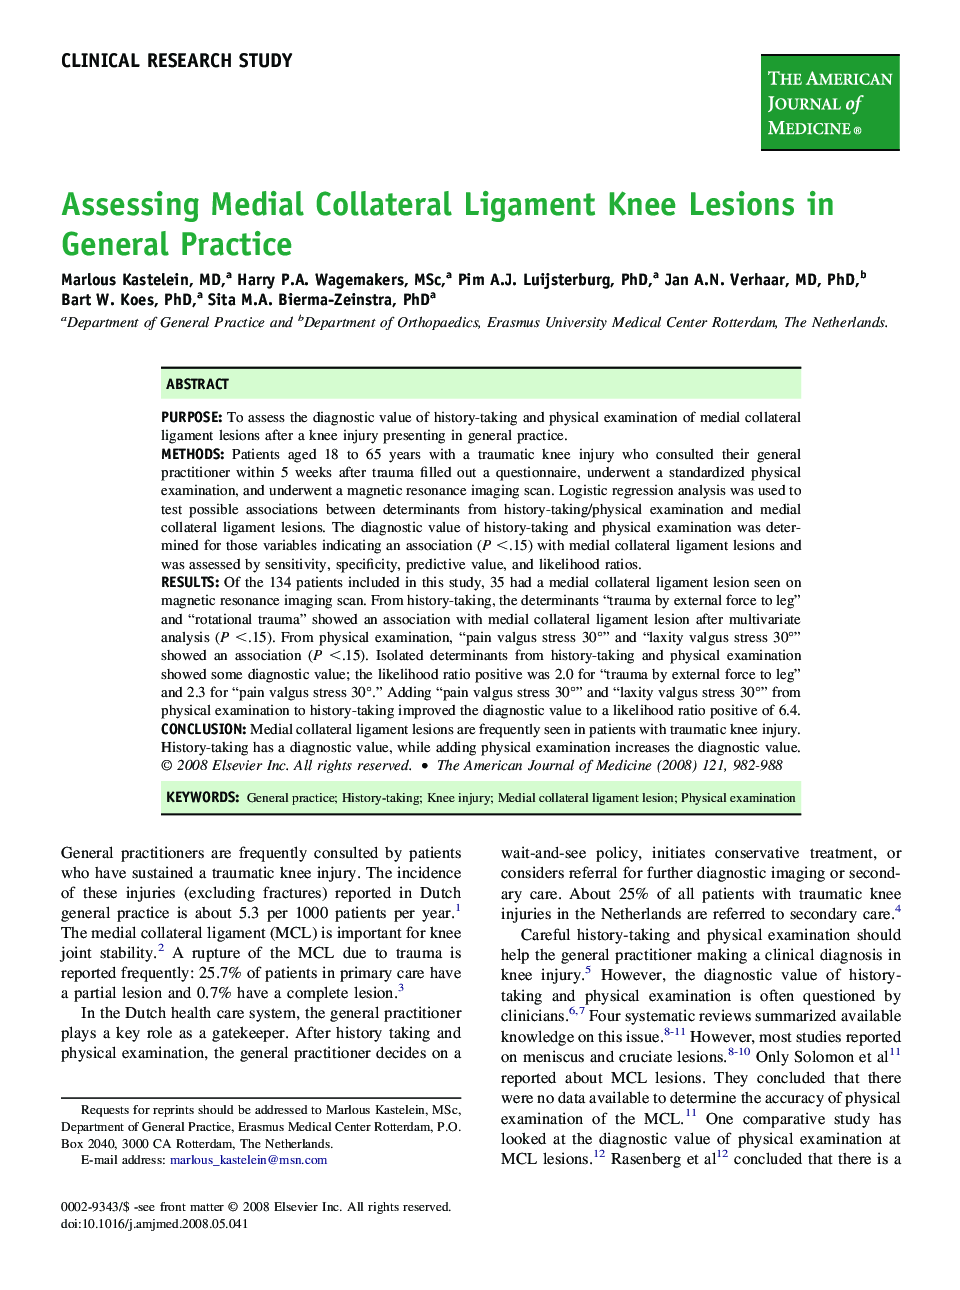 Assessing Medial Collateral Ligament Knee Lesions in General Practice